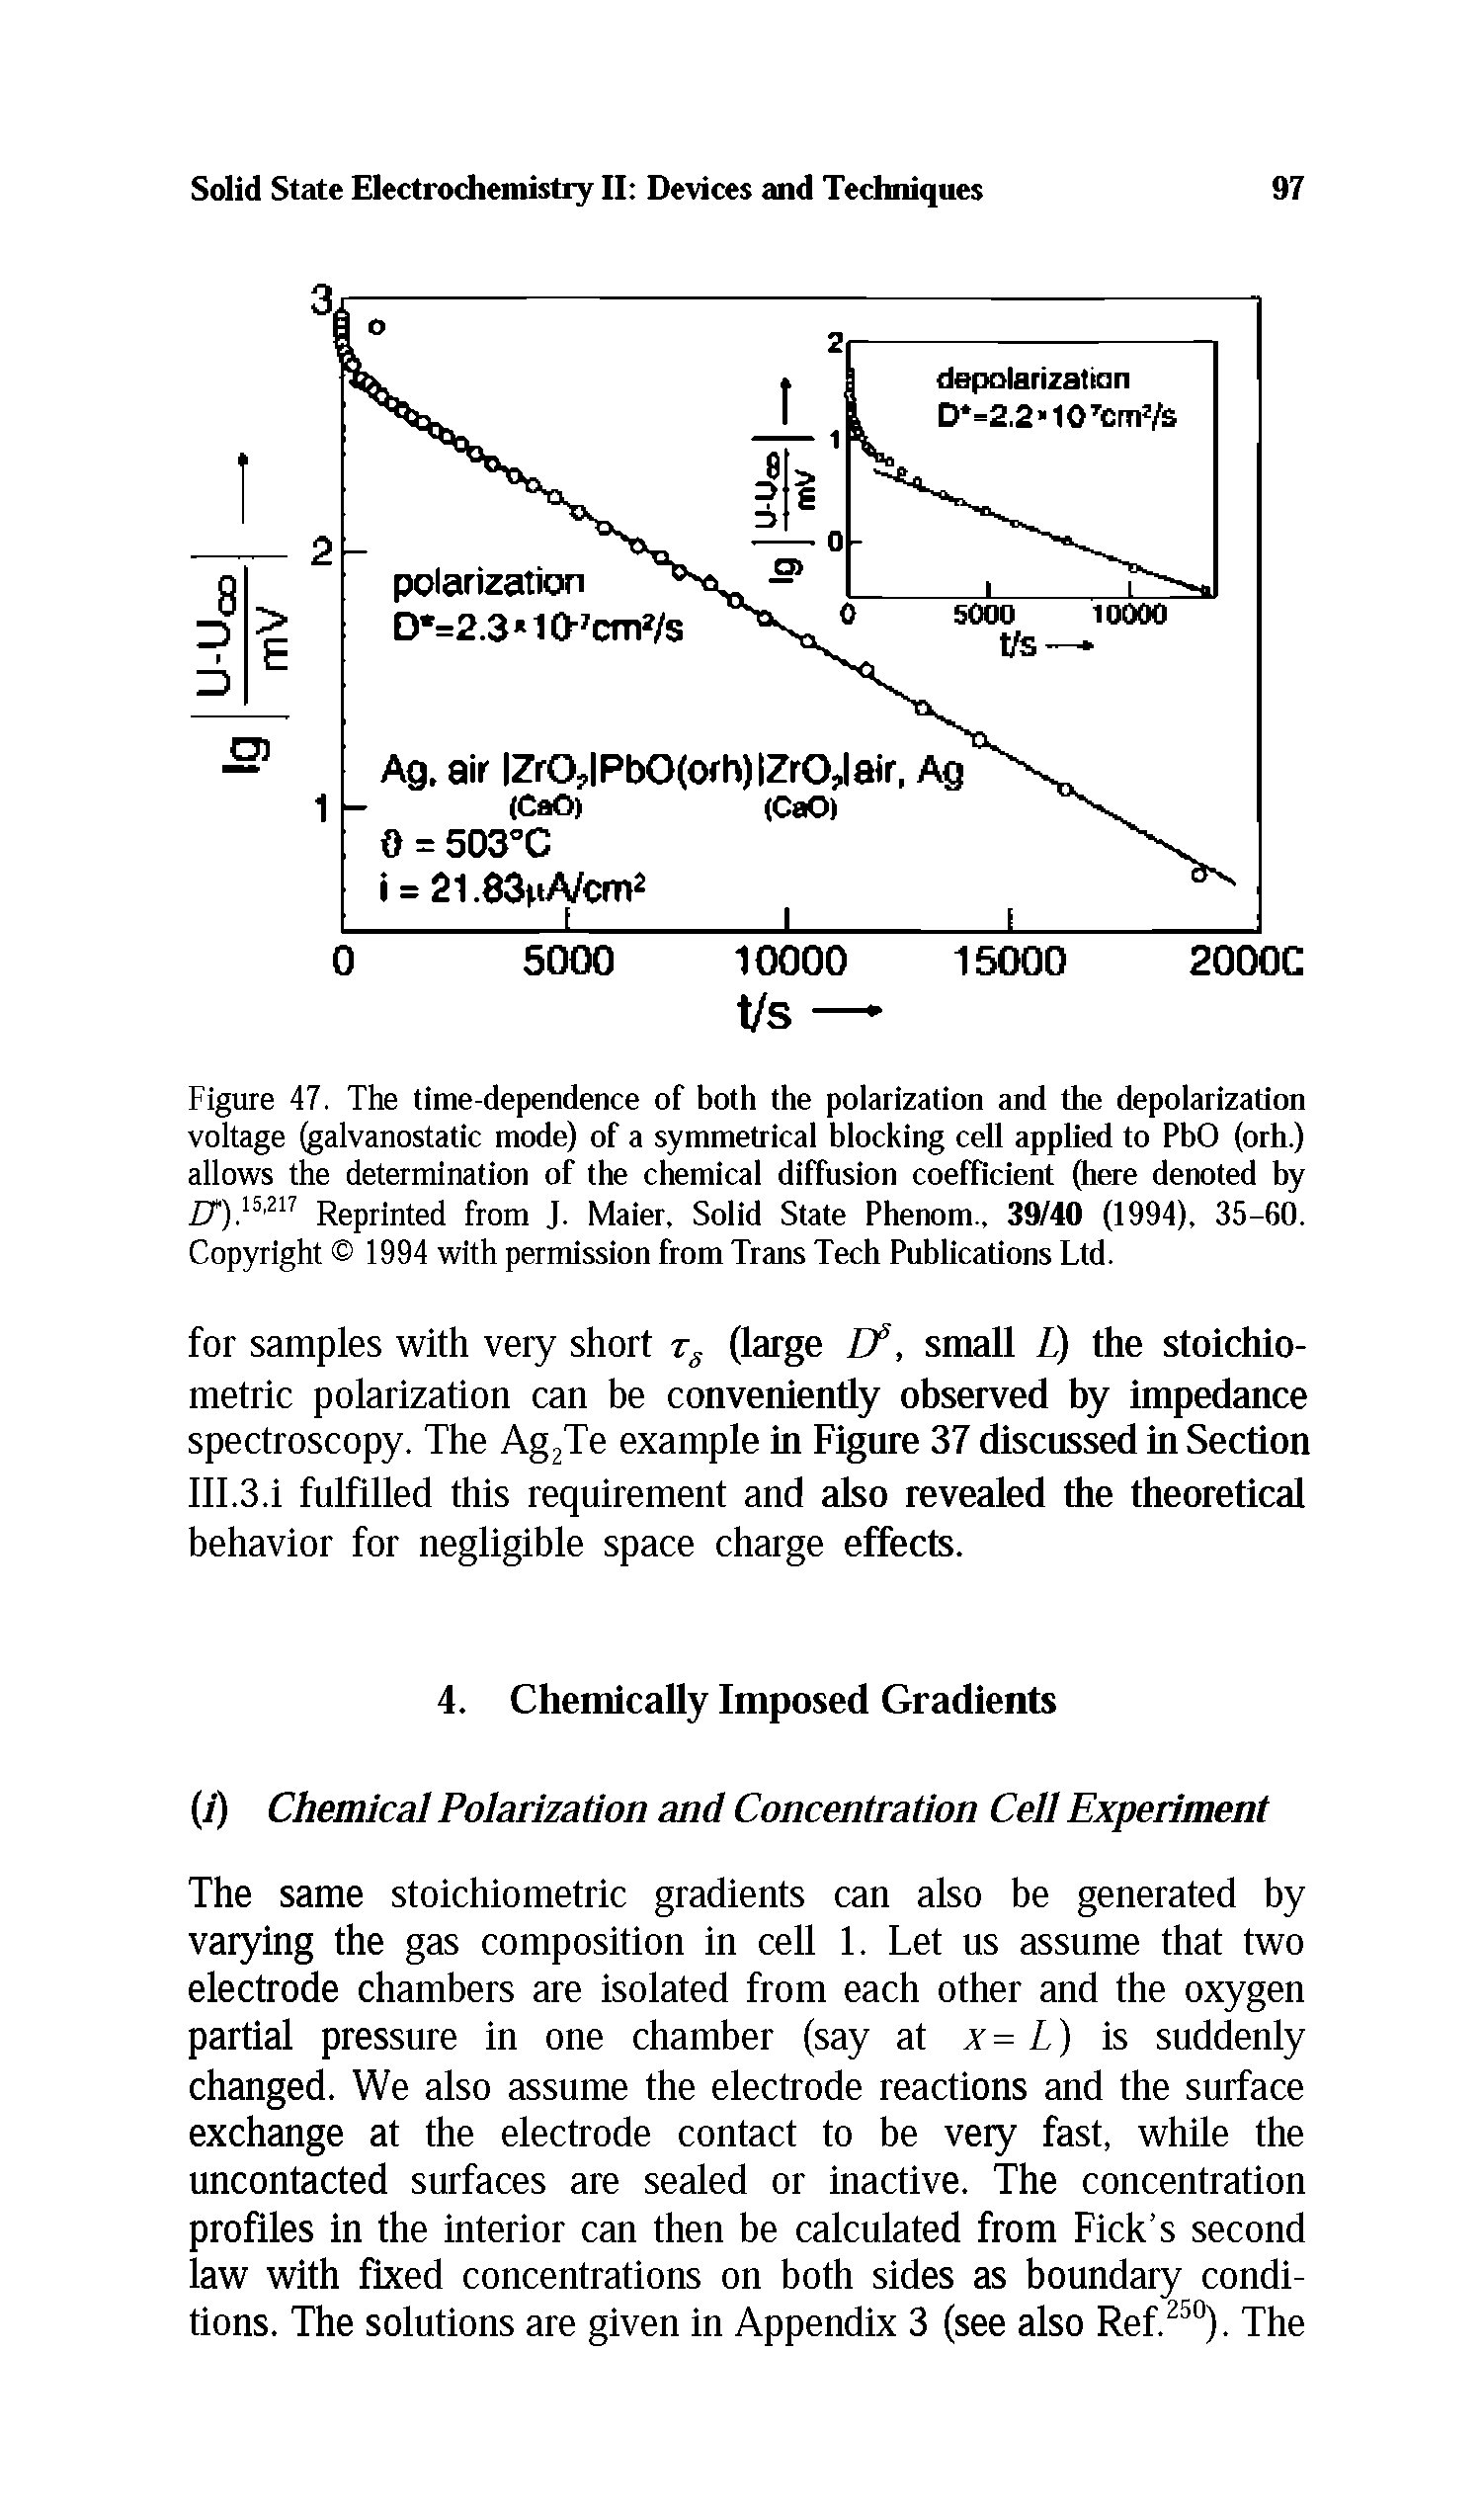 Figure 47. The time-dependence of both the polarization and the depolarization voltage (galvanostatic mode) of a symmetrical blocking cell applied to PbO (orh.) allows the determination of the chemical diffusion coefficient (here denoted by IT).15,217 Reprinted from J. Maier, Solid State Phenom., 39/40 (1994), 35-60. Copyright 1994 with permission from Trans Tech Publications Ltd.